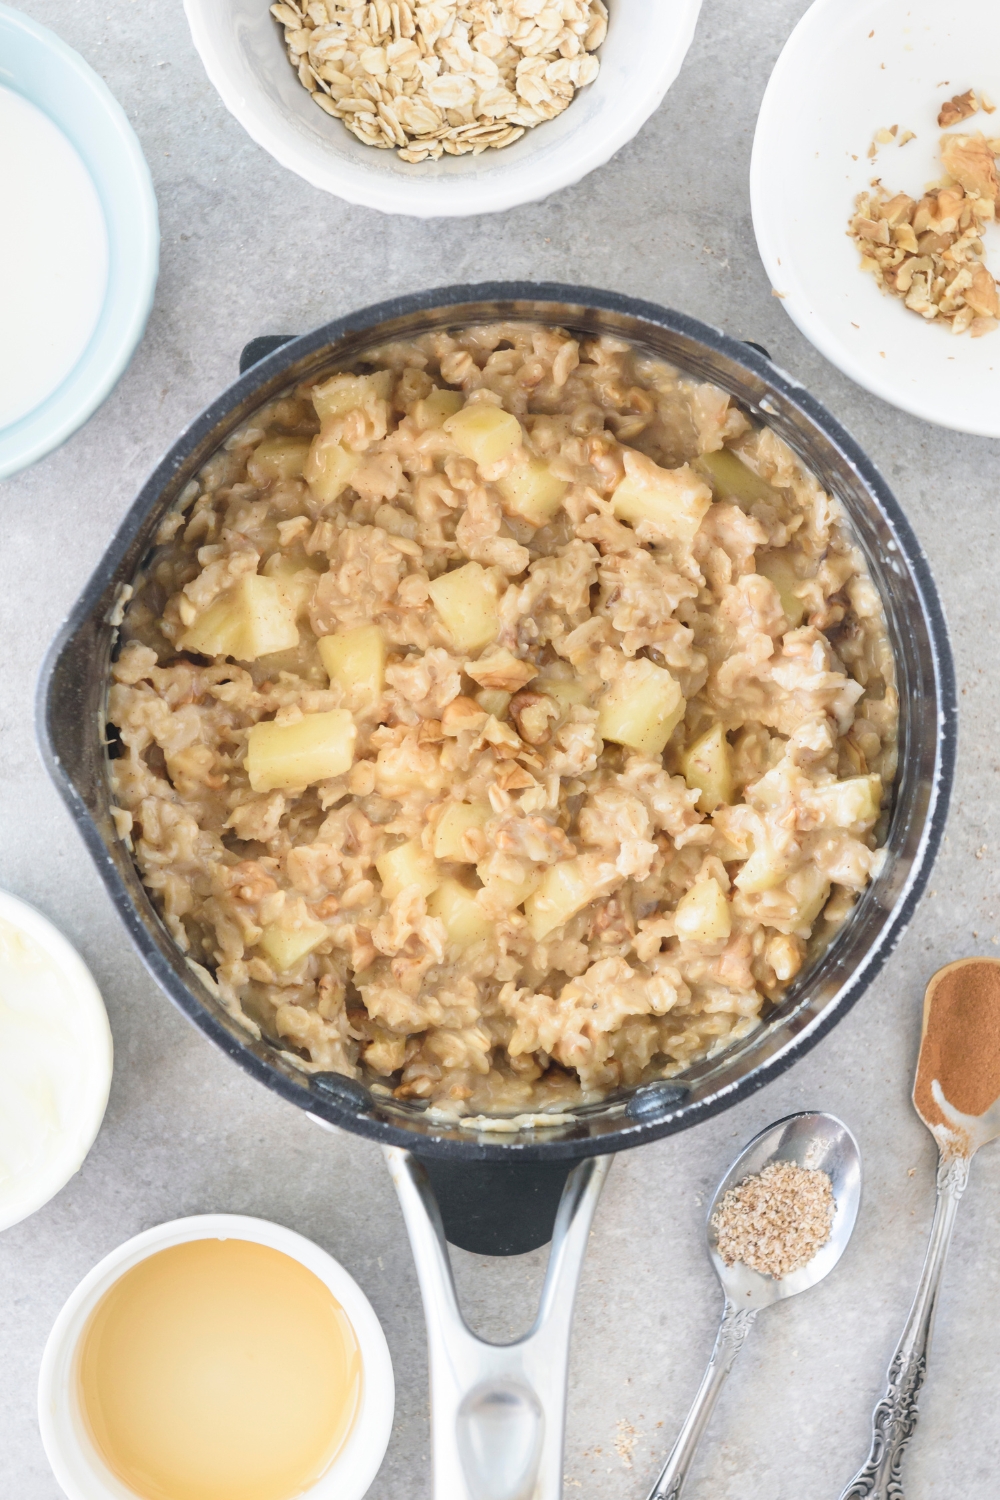 A pot filled with creamy oatmeal with diced apples and nuts mixed in.